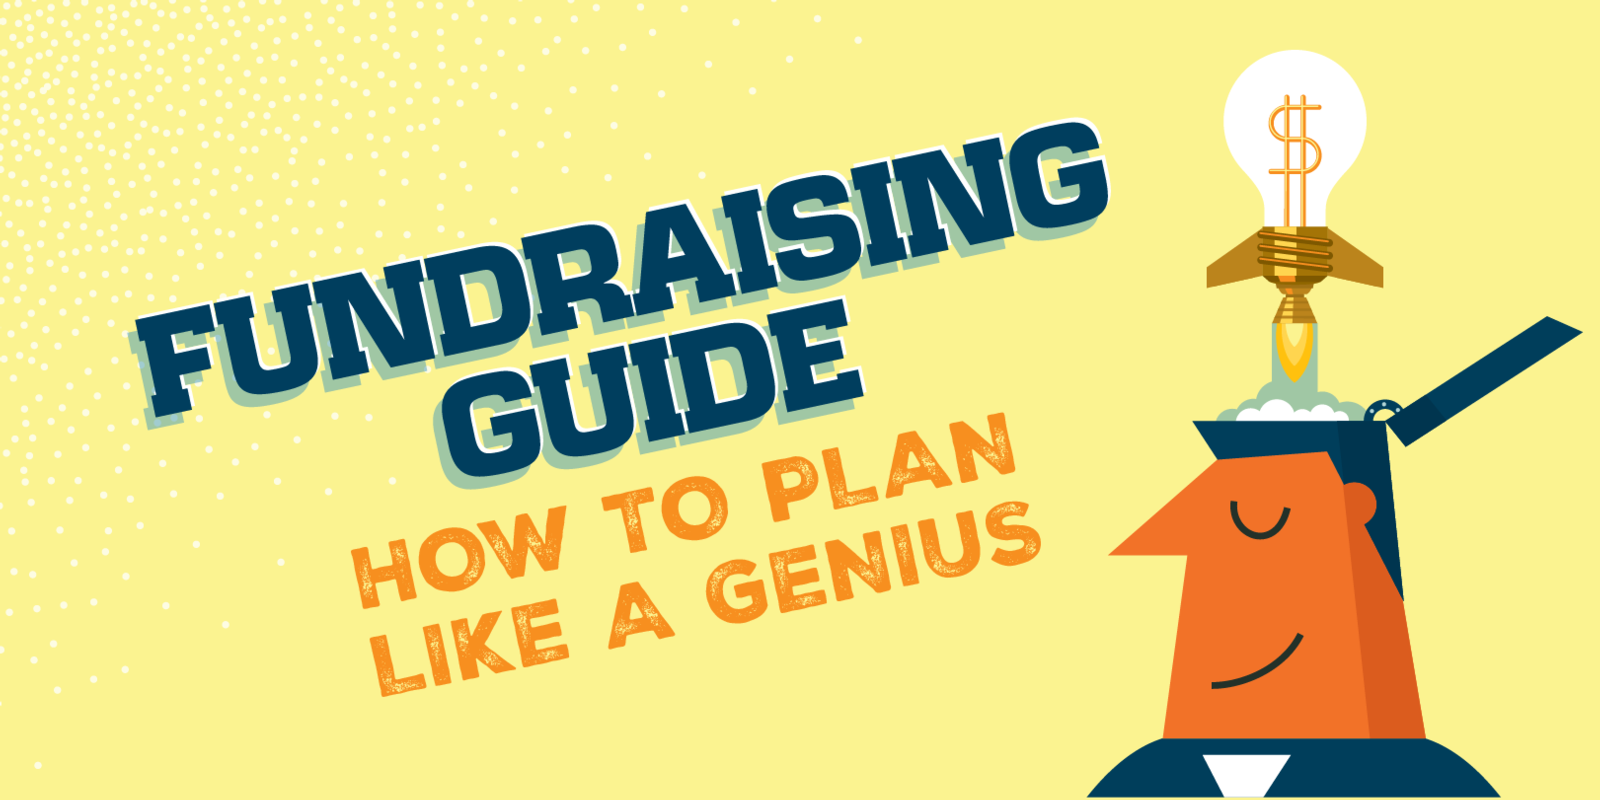 Fundraising Guide: How to Plan Like a Genius